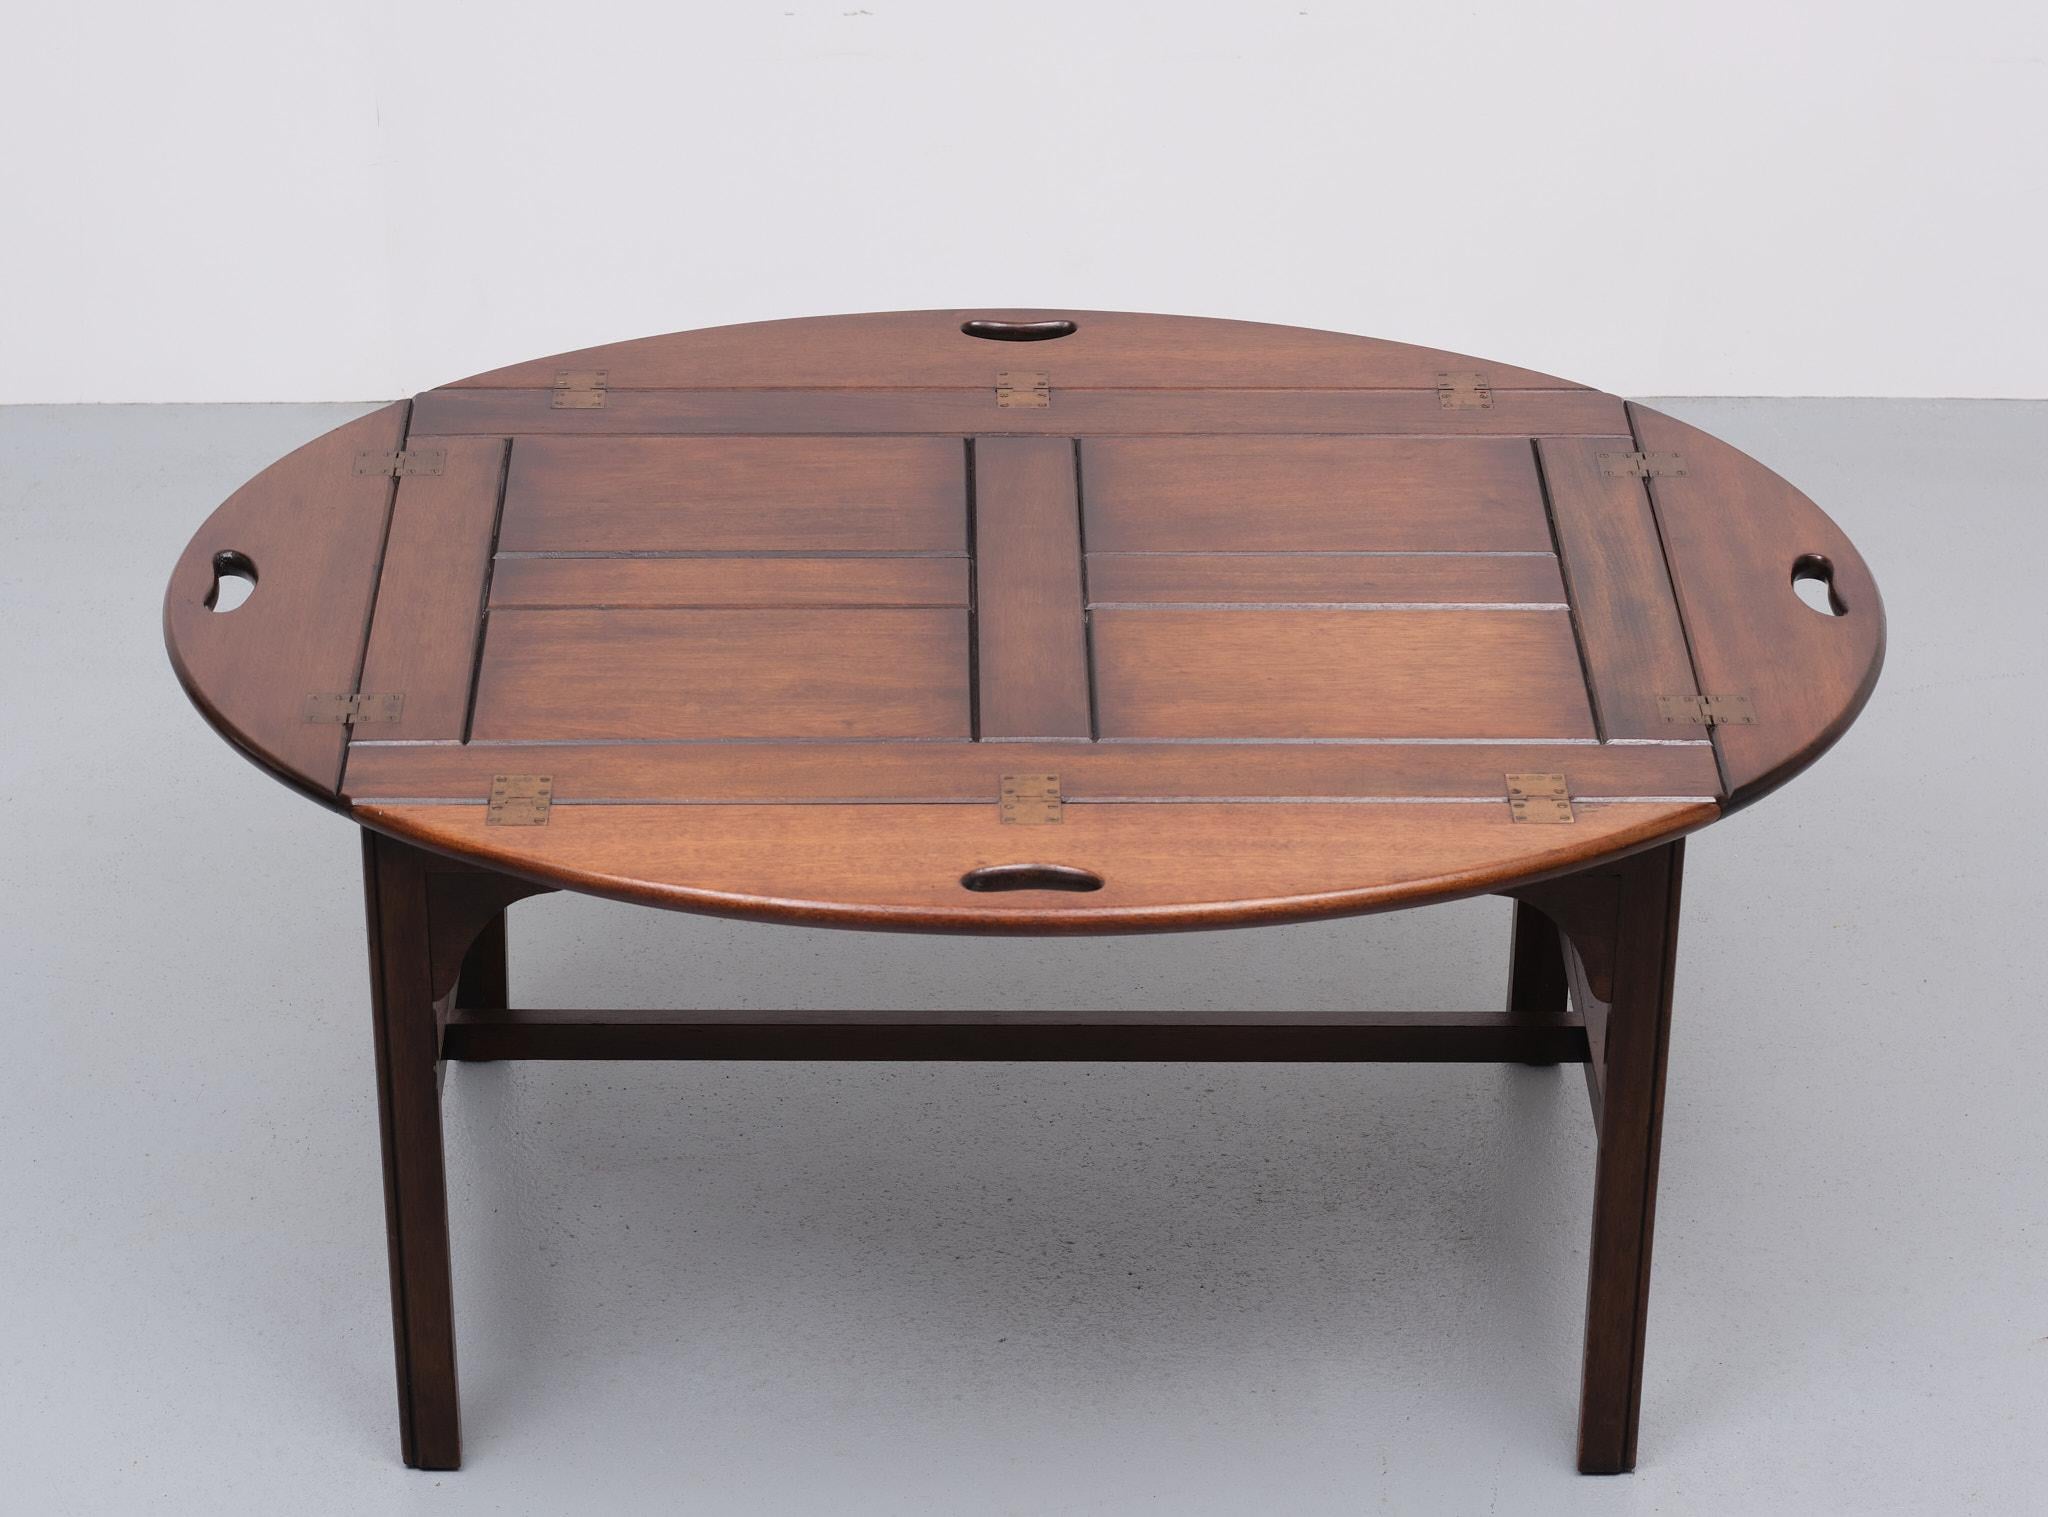 Very nice classic tray table. Tick solid mahogany tray. Fits perfect on the table. Brass hinges. Good quality table. Manufactured by Bevan Funnell England 1960s.